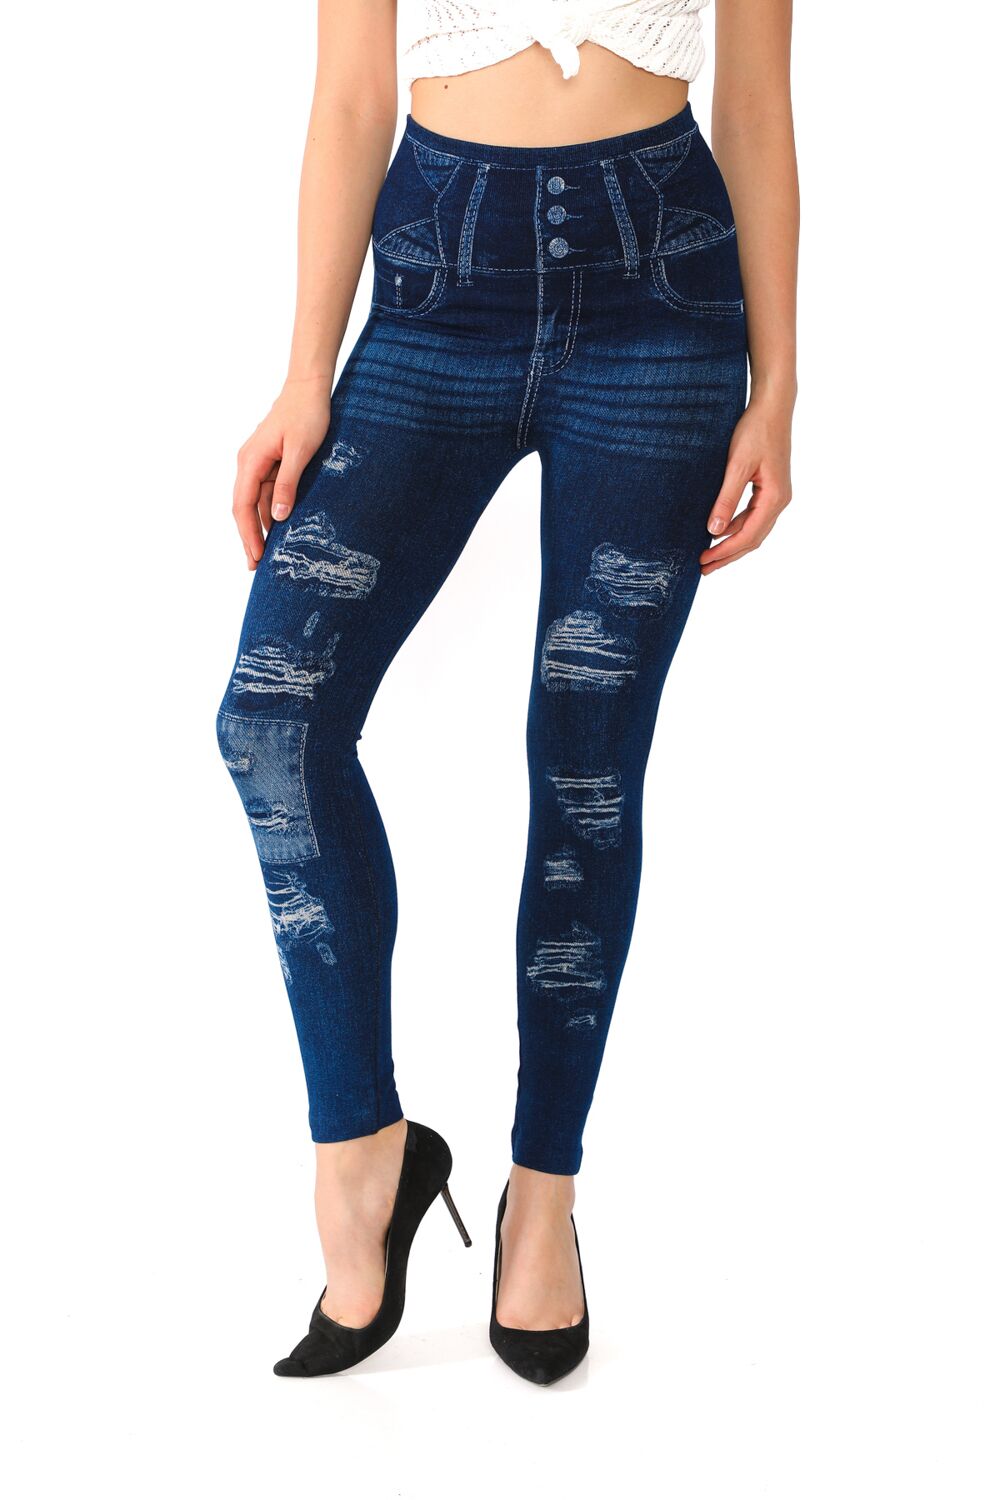 Denim Leggings with Patchy Ripped Pattern